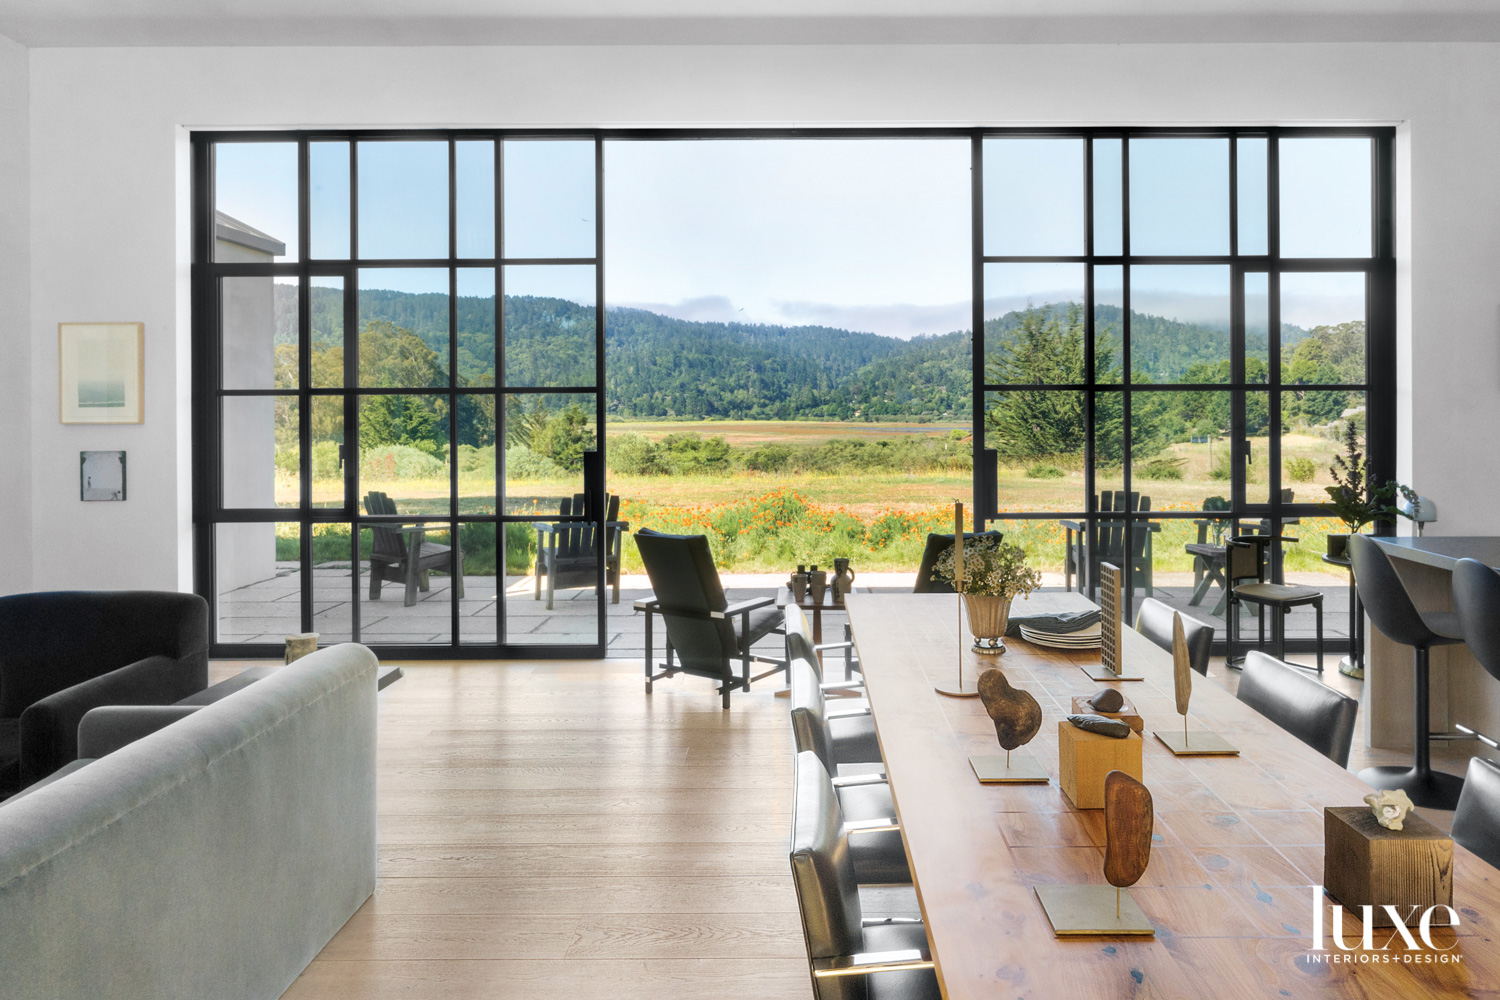 Large metal doors open the living and dining areas to the lush landscape.